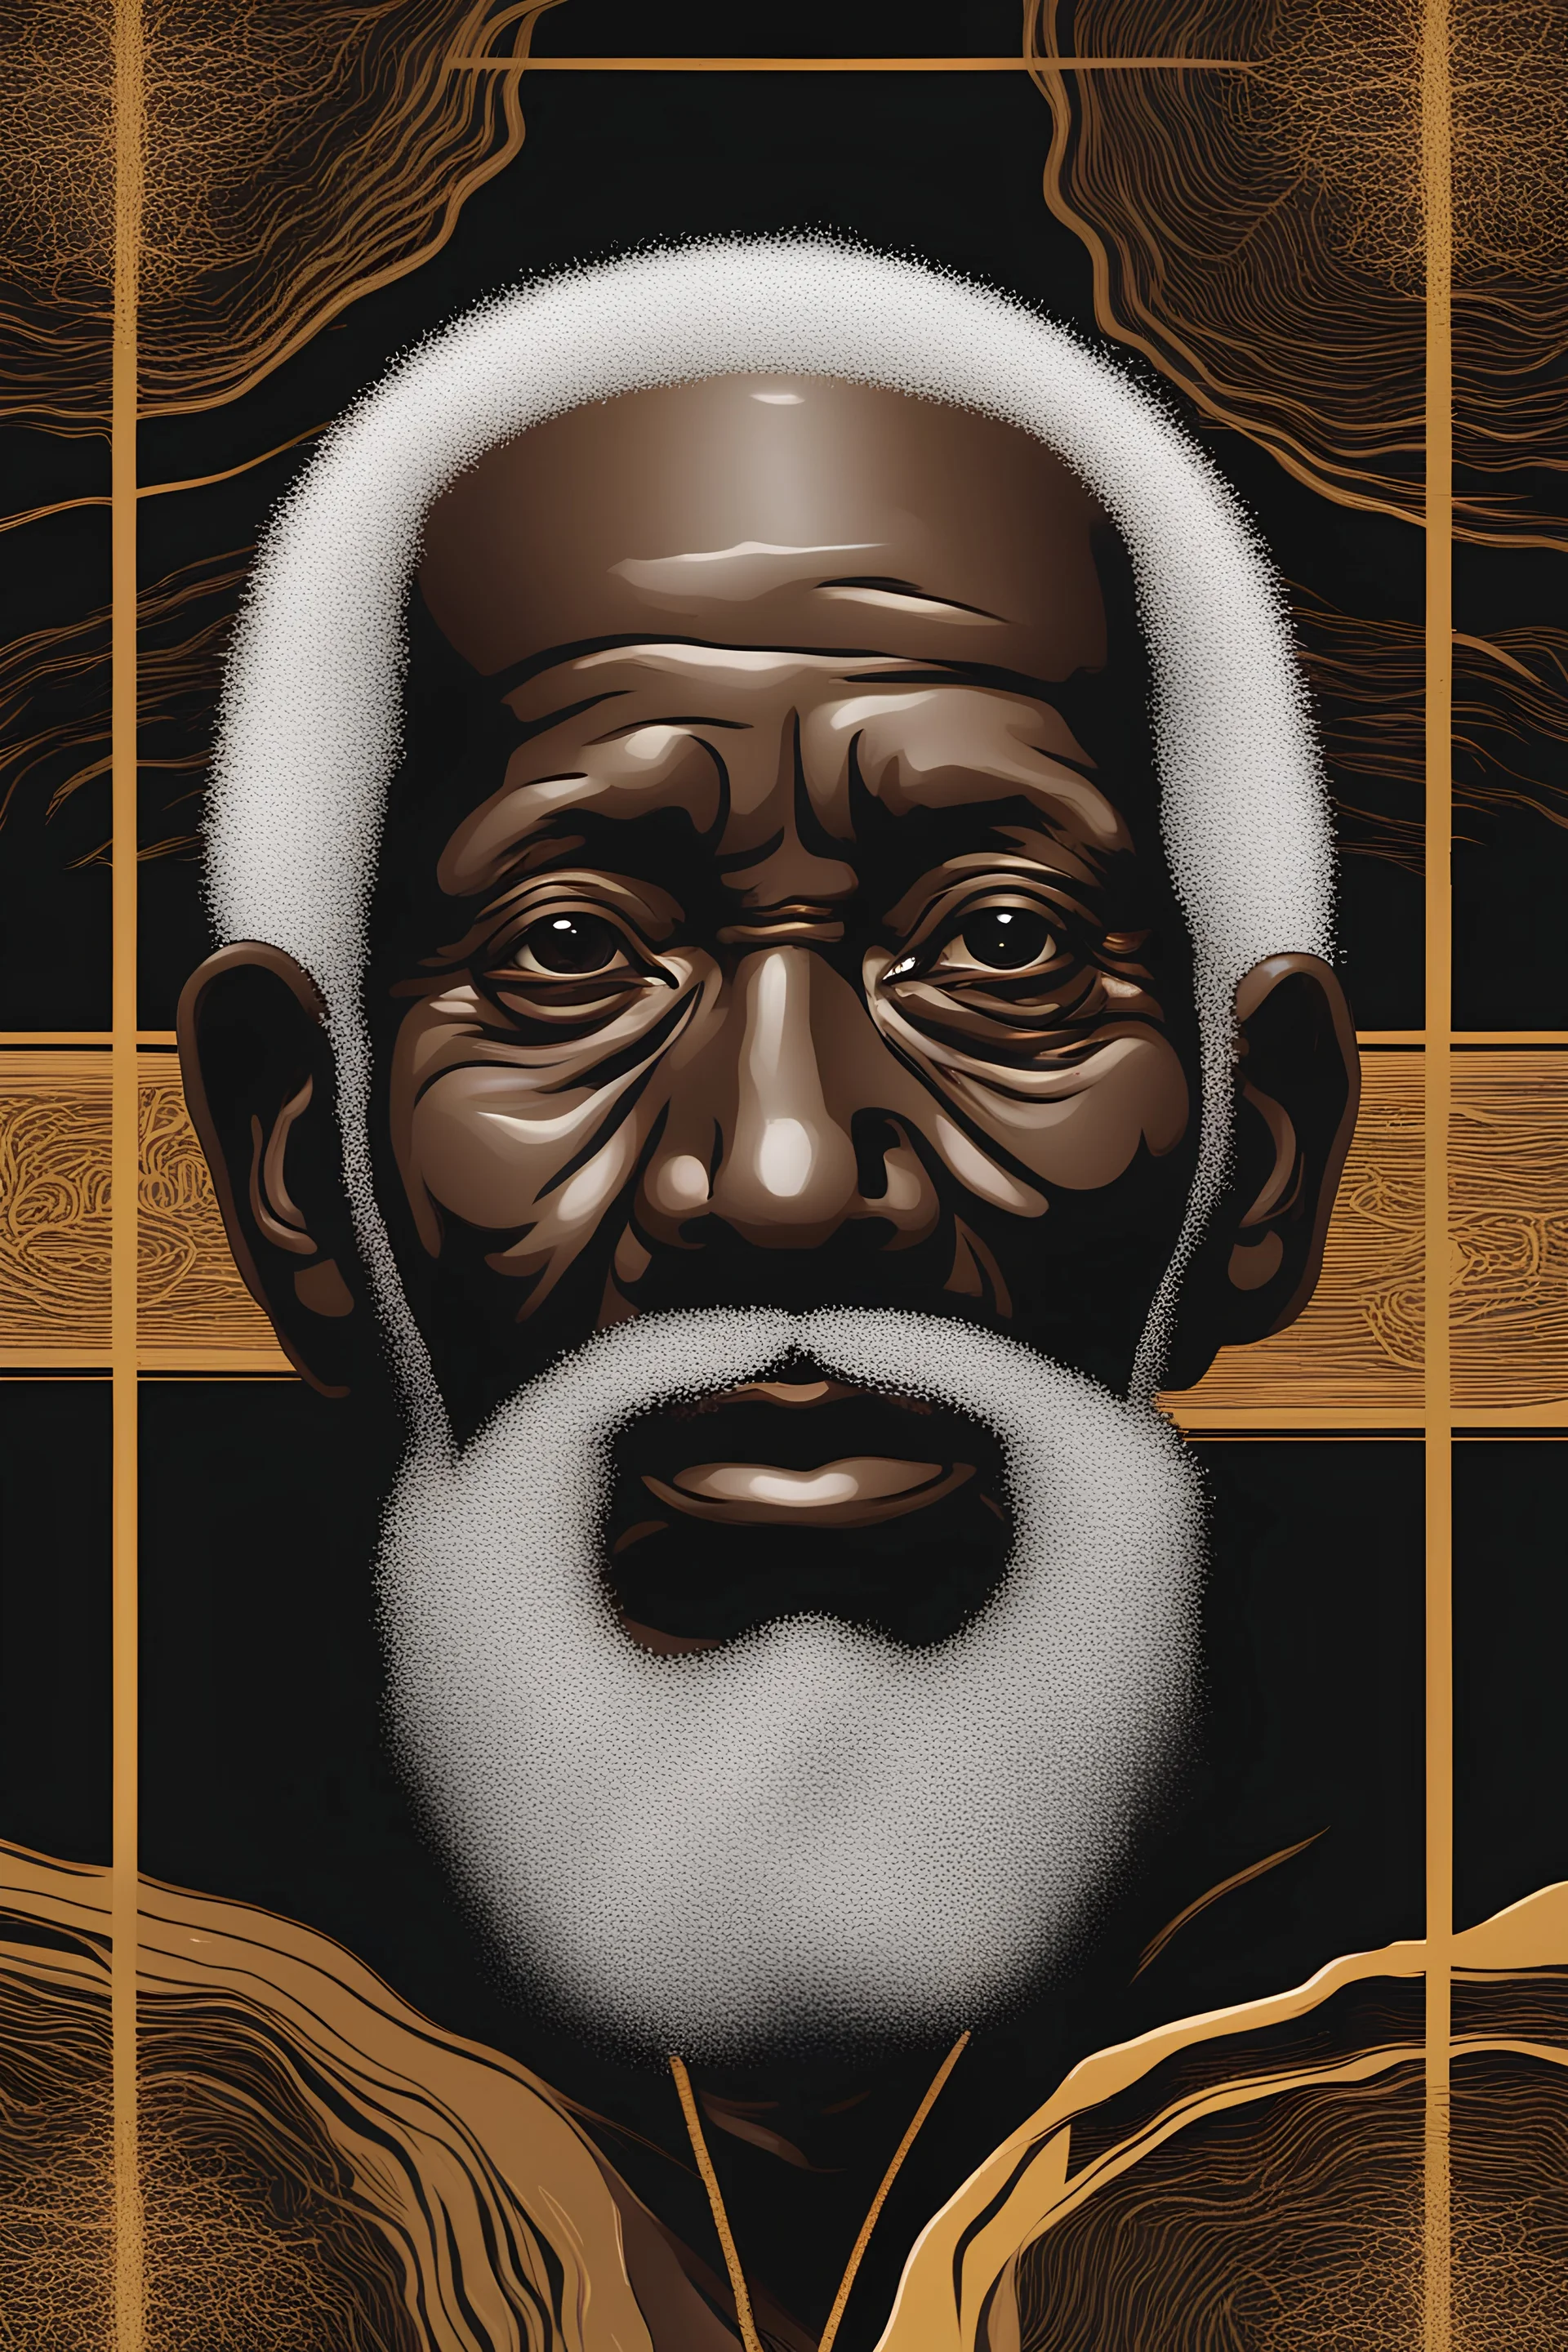 A face image of an enlightened old African man with white Beards and bar hair, dark background